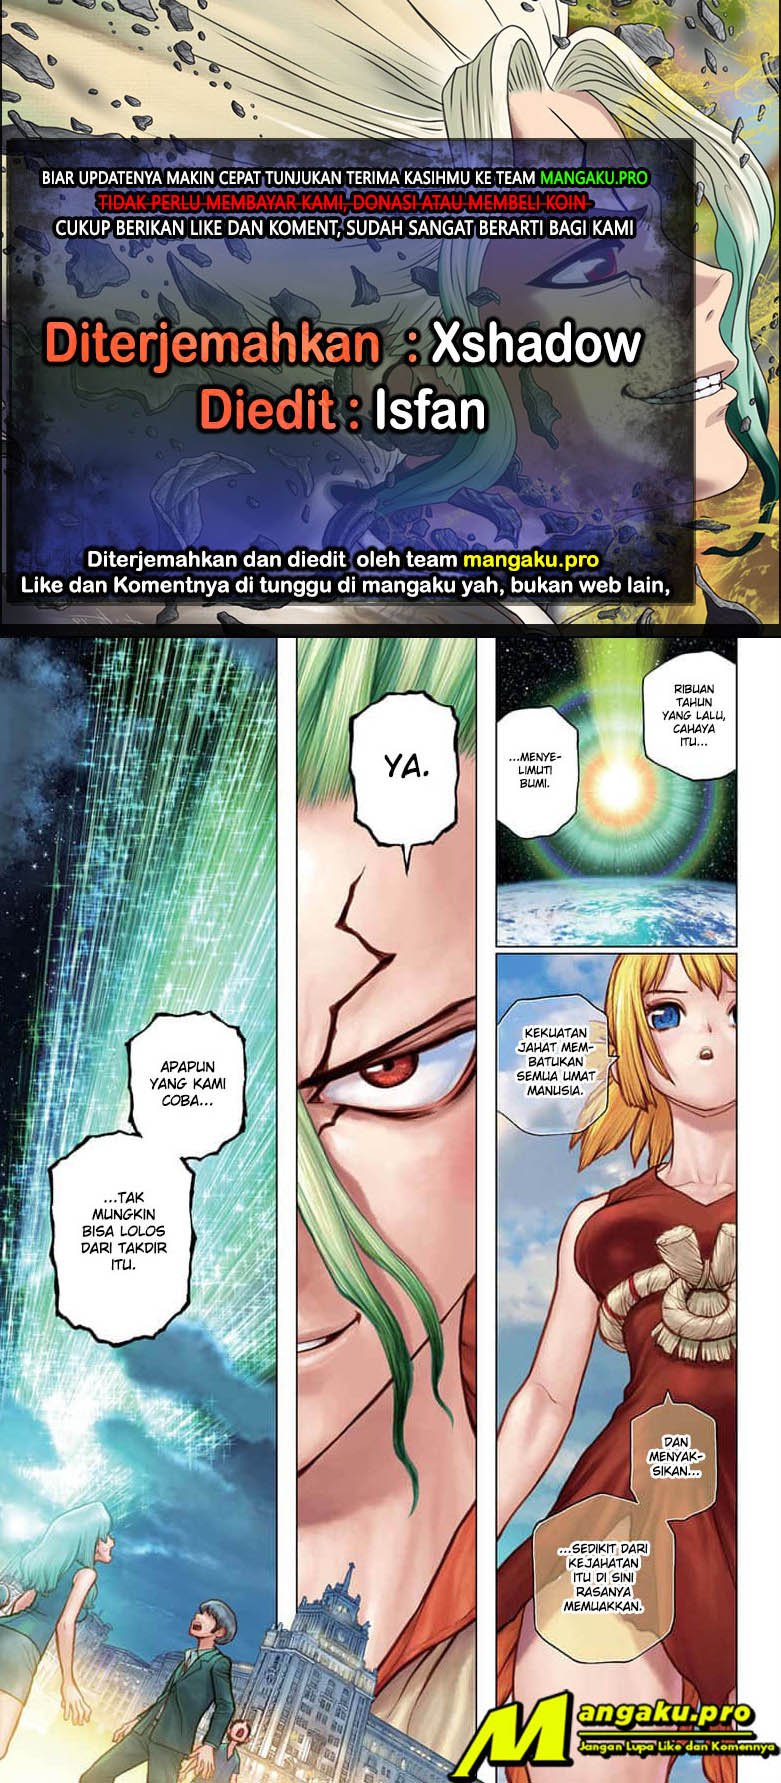 Dr. Stone Chapter 181